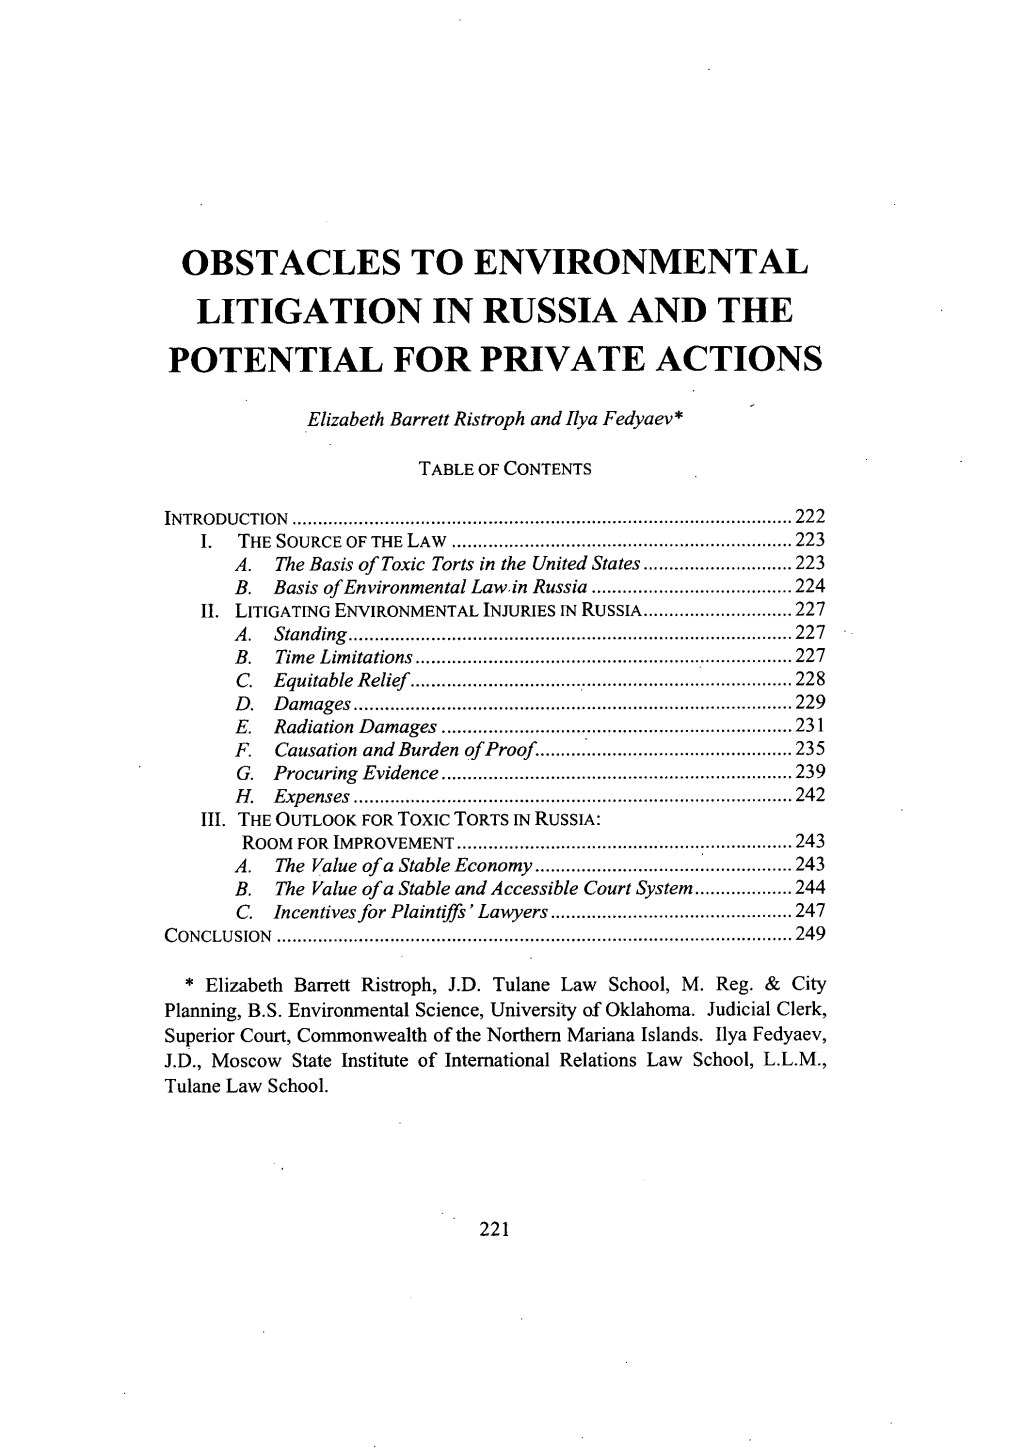 Obstacles to Environmental Litigation in Russia and the Potential for Private Actions